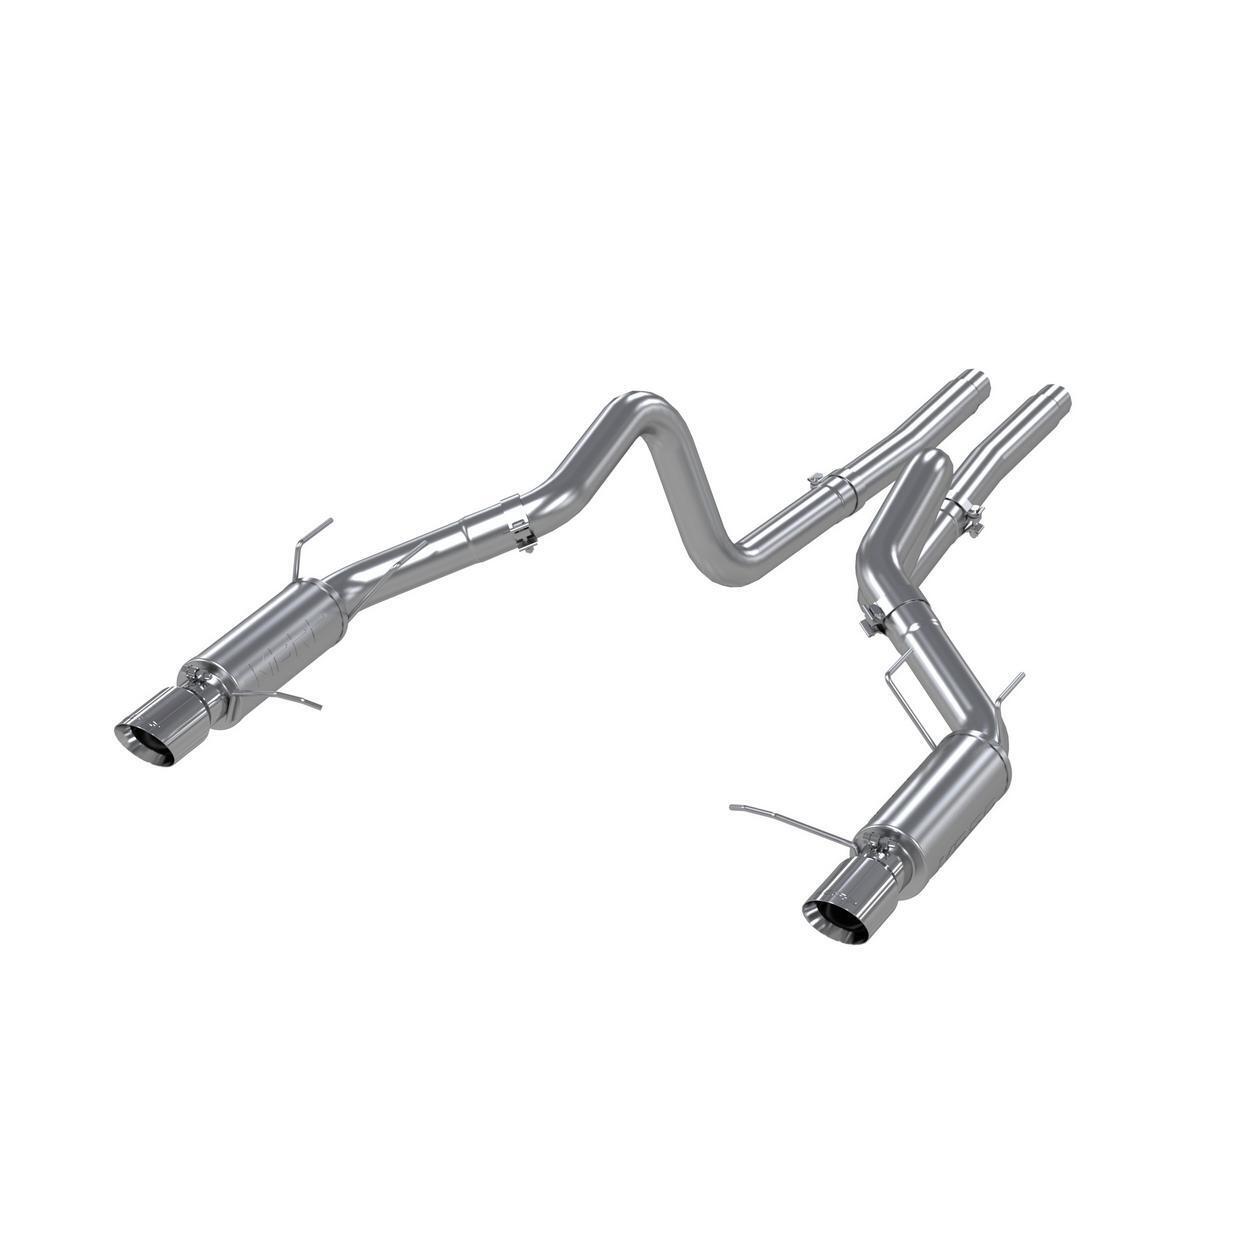 Exhaust System Kit for 2011-2012 Ford Mustang Shelby GT500 Supercharged 5.4L V8